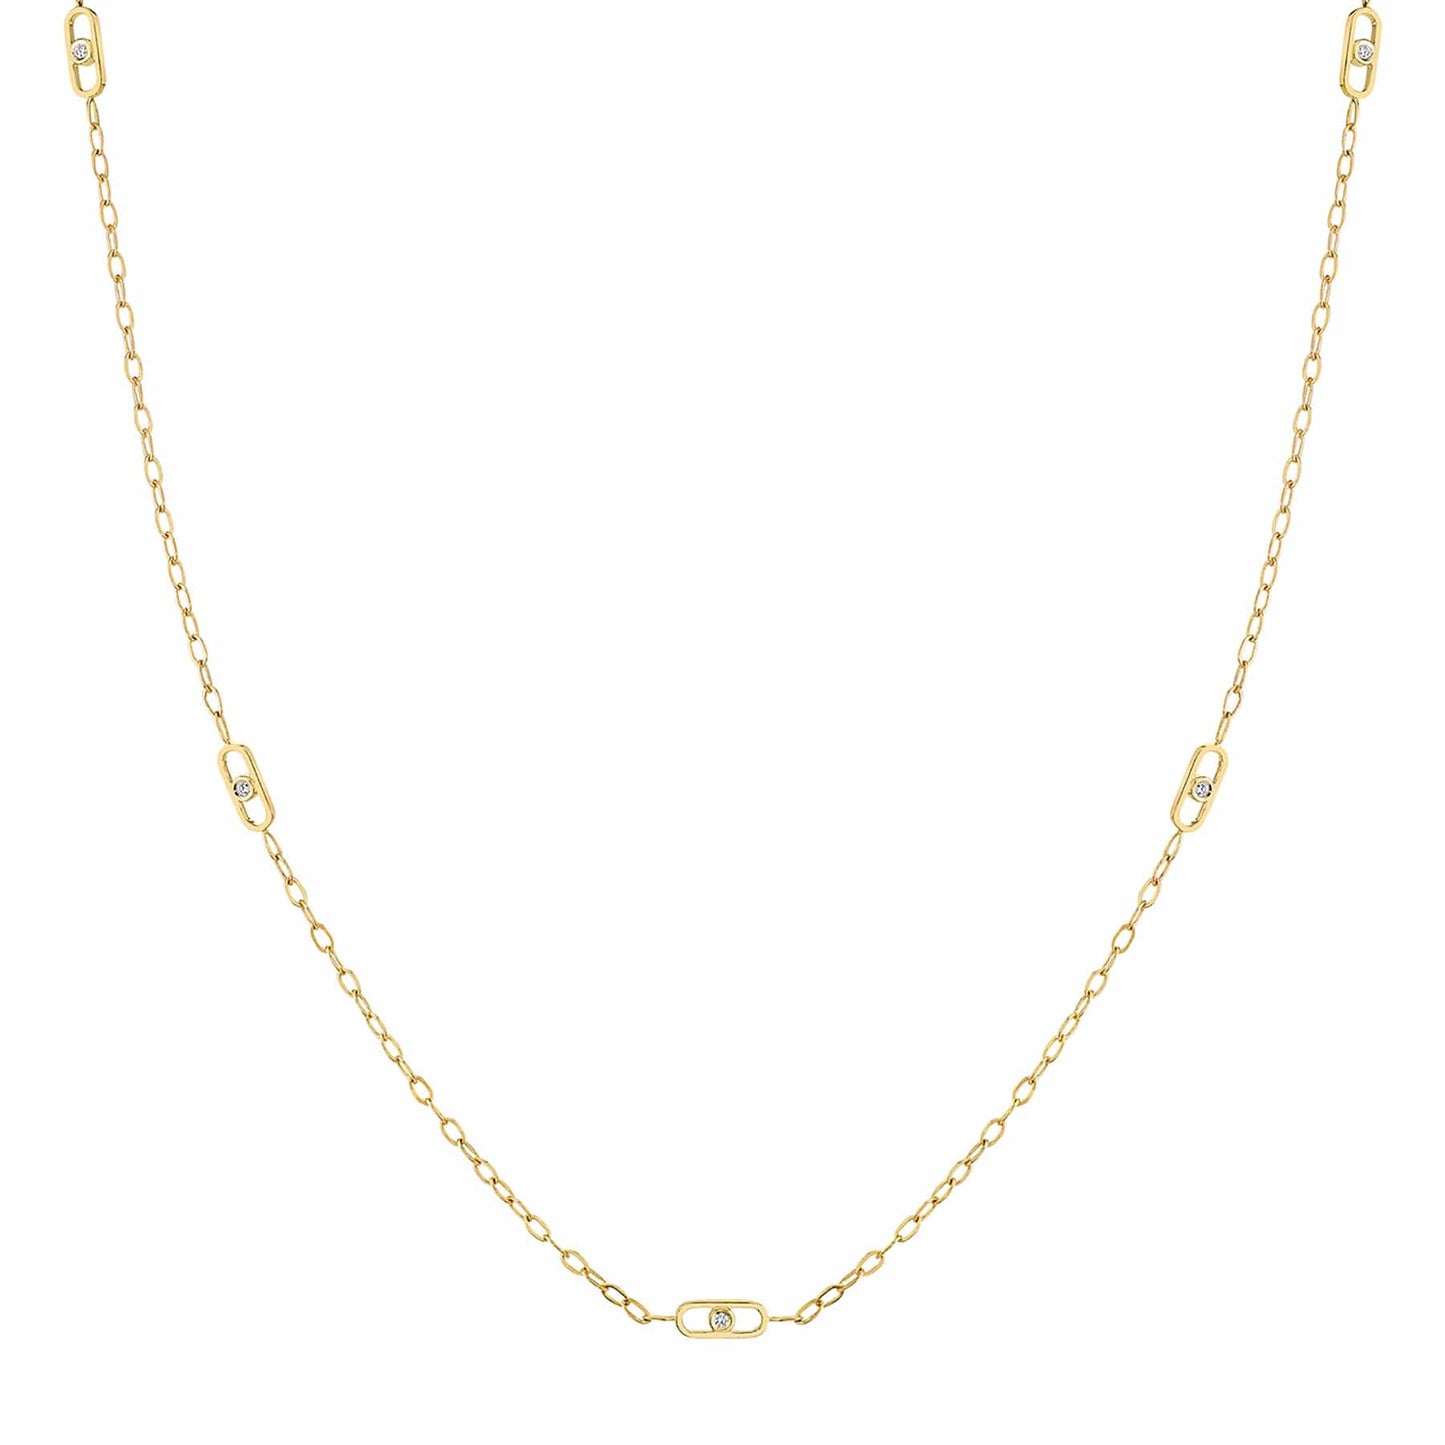 Michael M 14k Yellow Gold Link Stations 24" Diamond Necklace